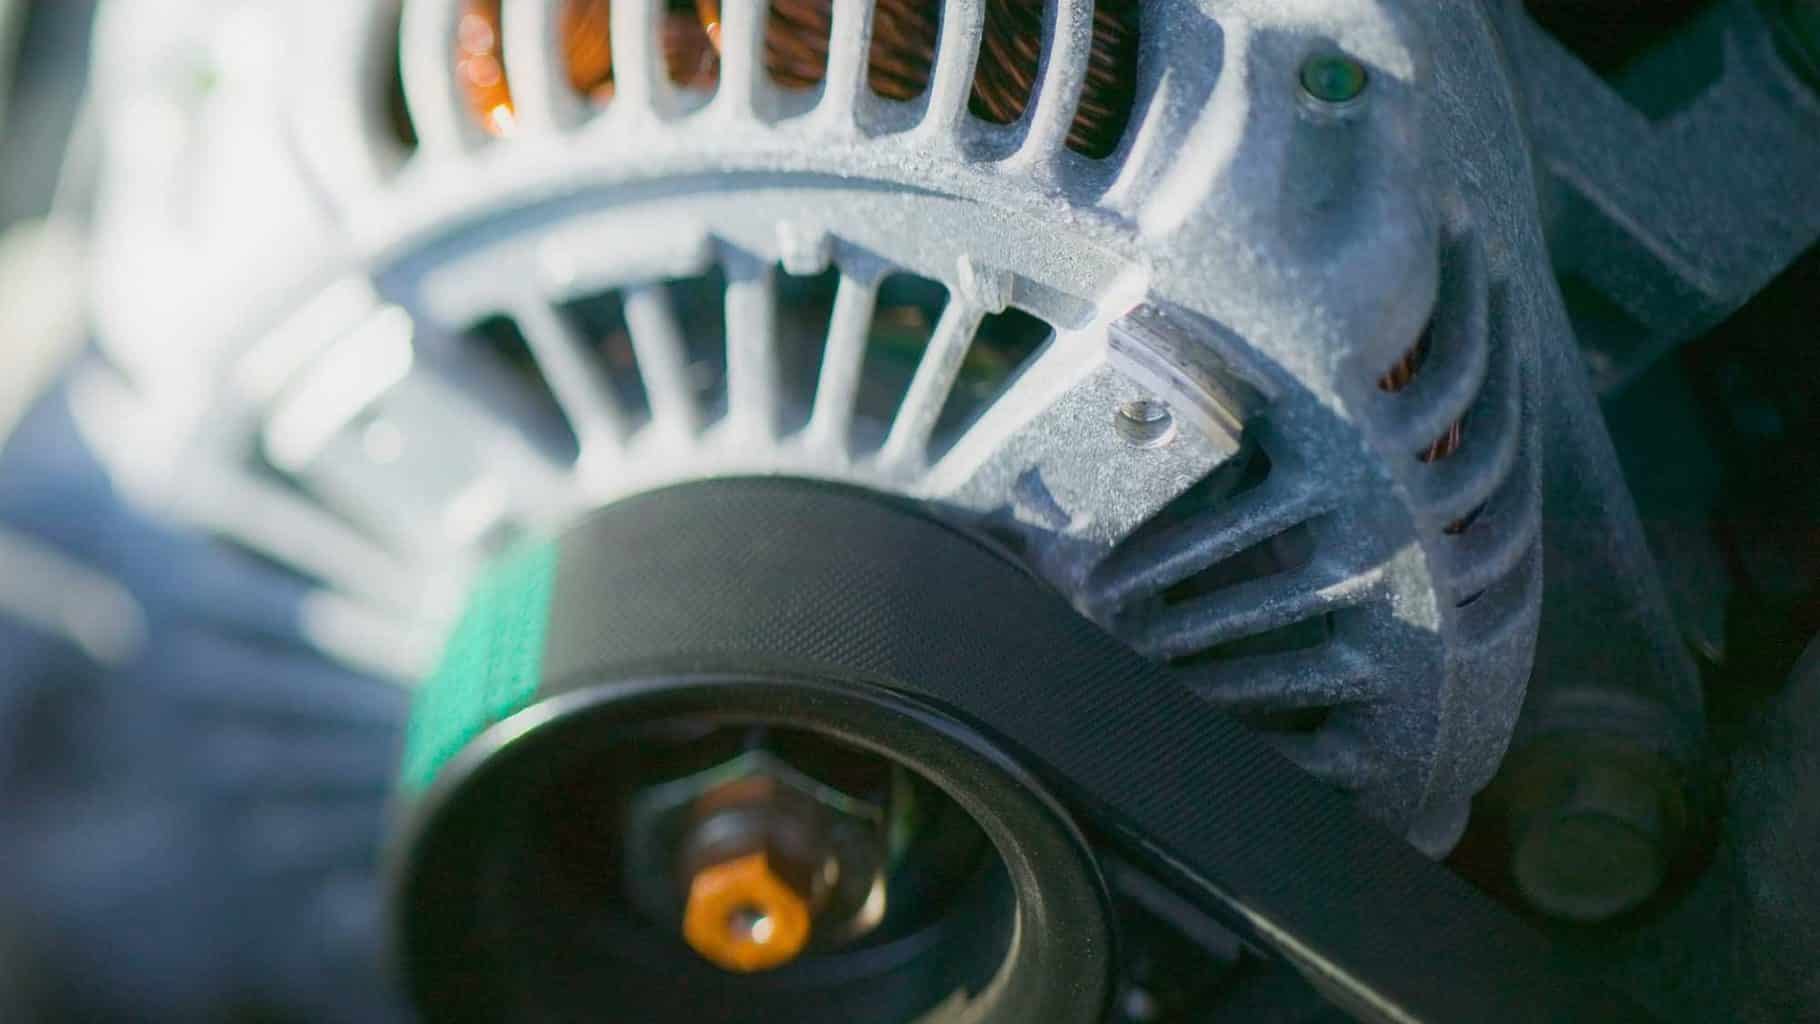 How Long Does It Take To Replace An Alternator?